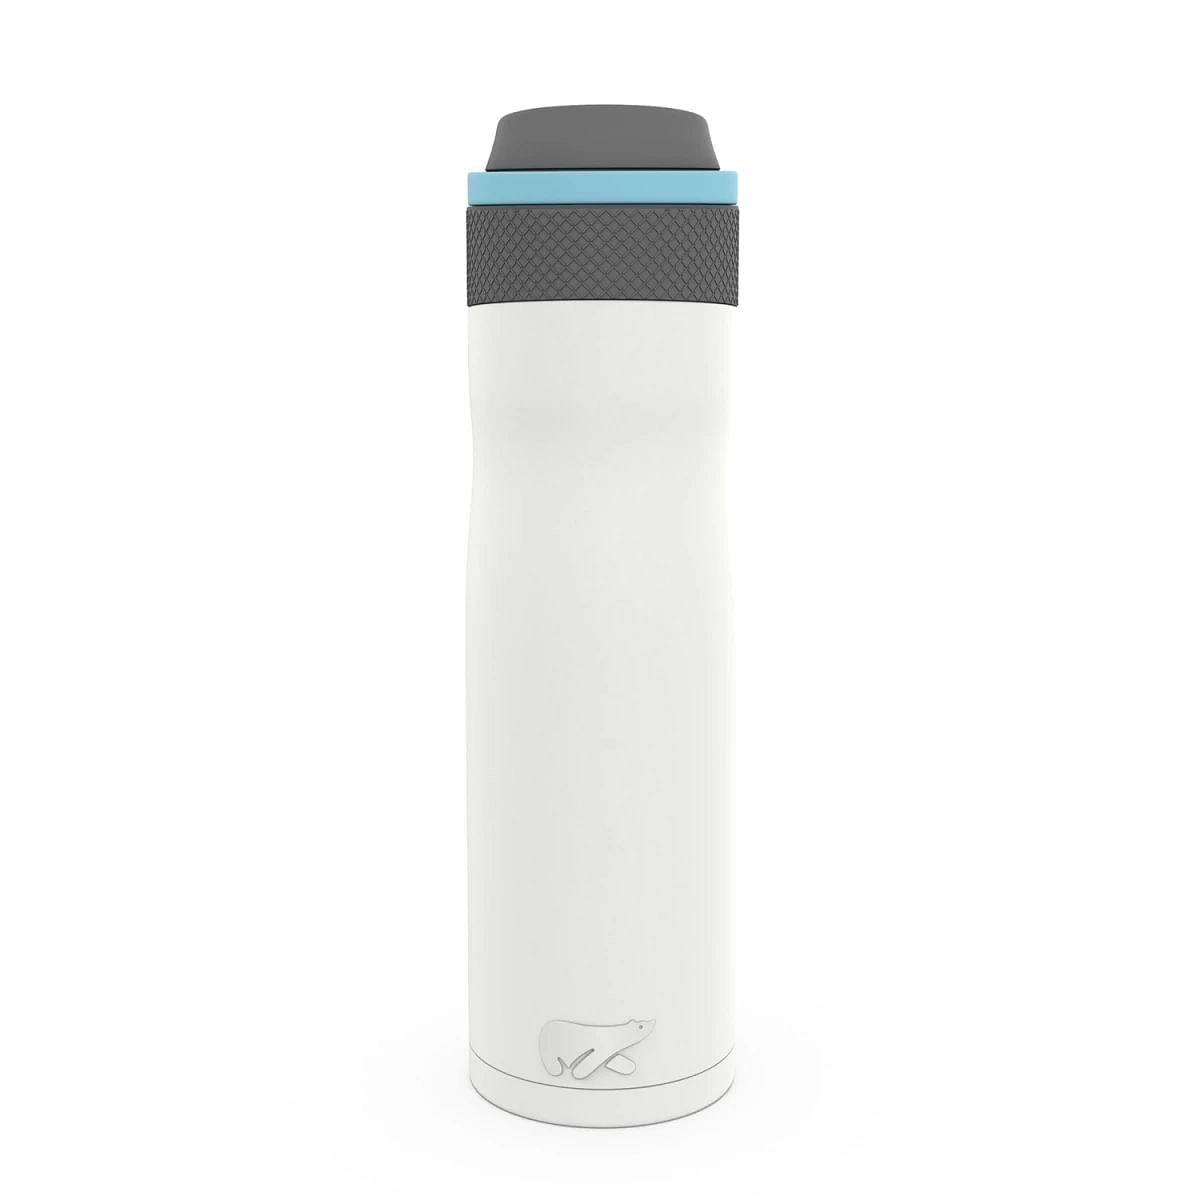 Headway Oslo Vacuum Insulated Stainless Steel Bottle Polar White 750 ML White 10Y+